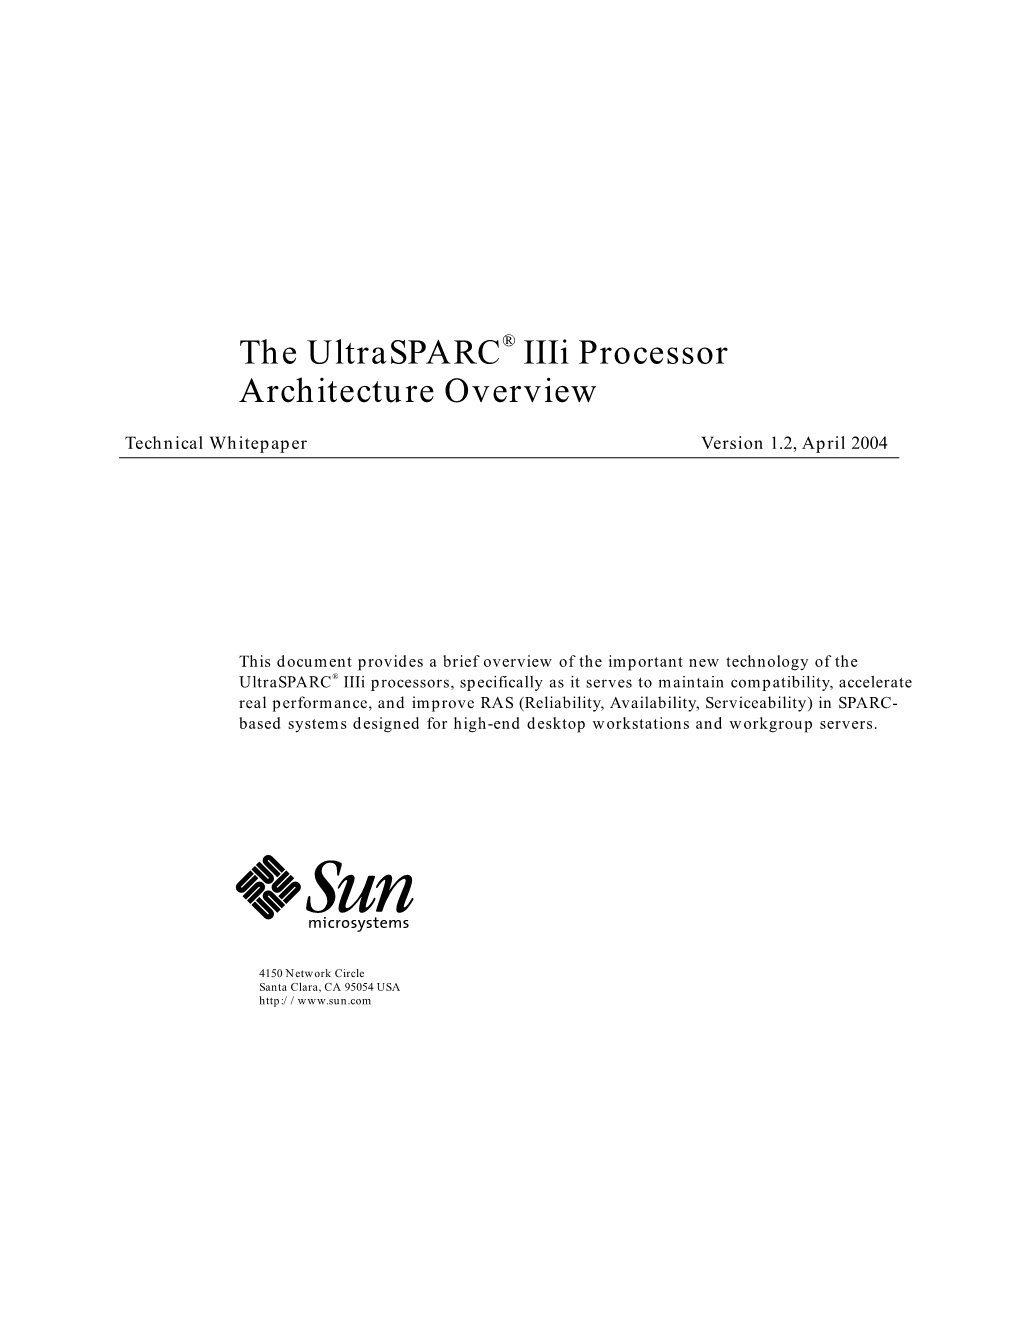 The Ultrasparc Iiii Processor Architecture Overview